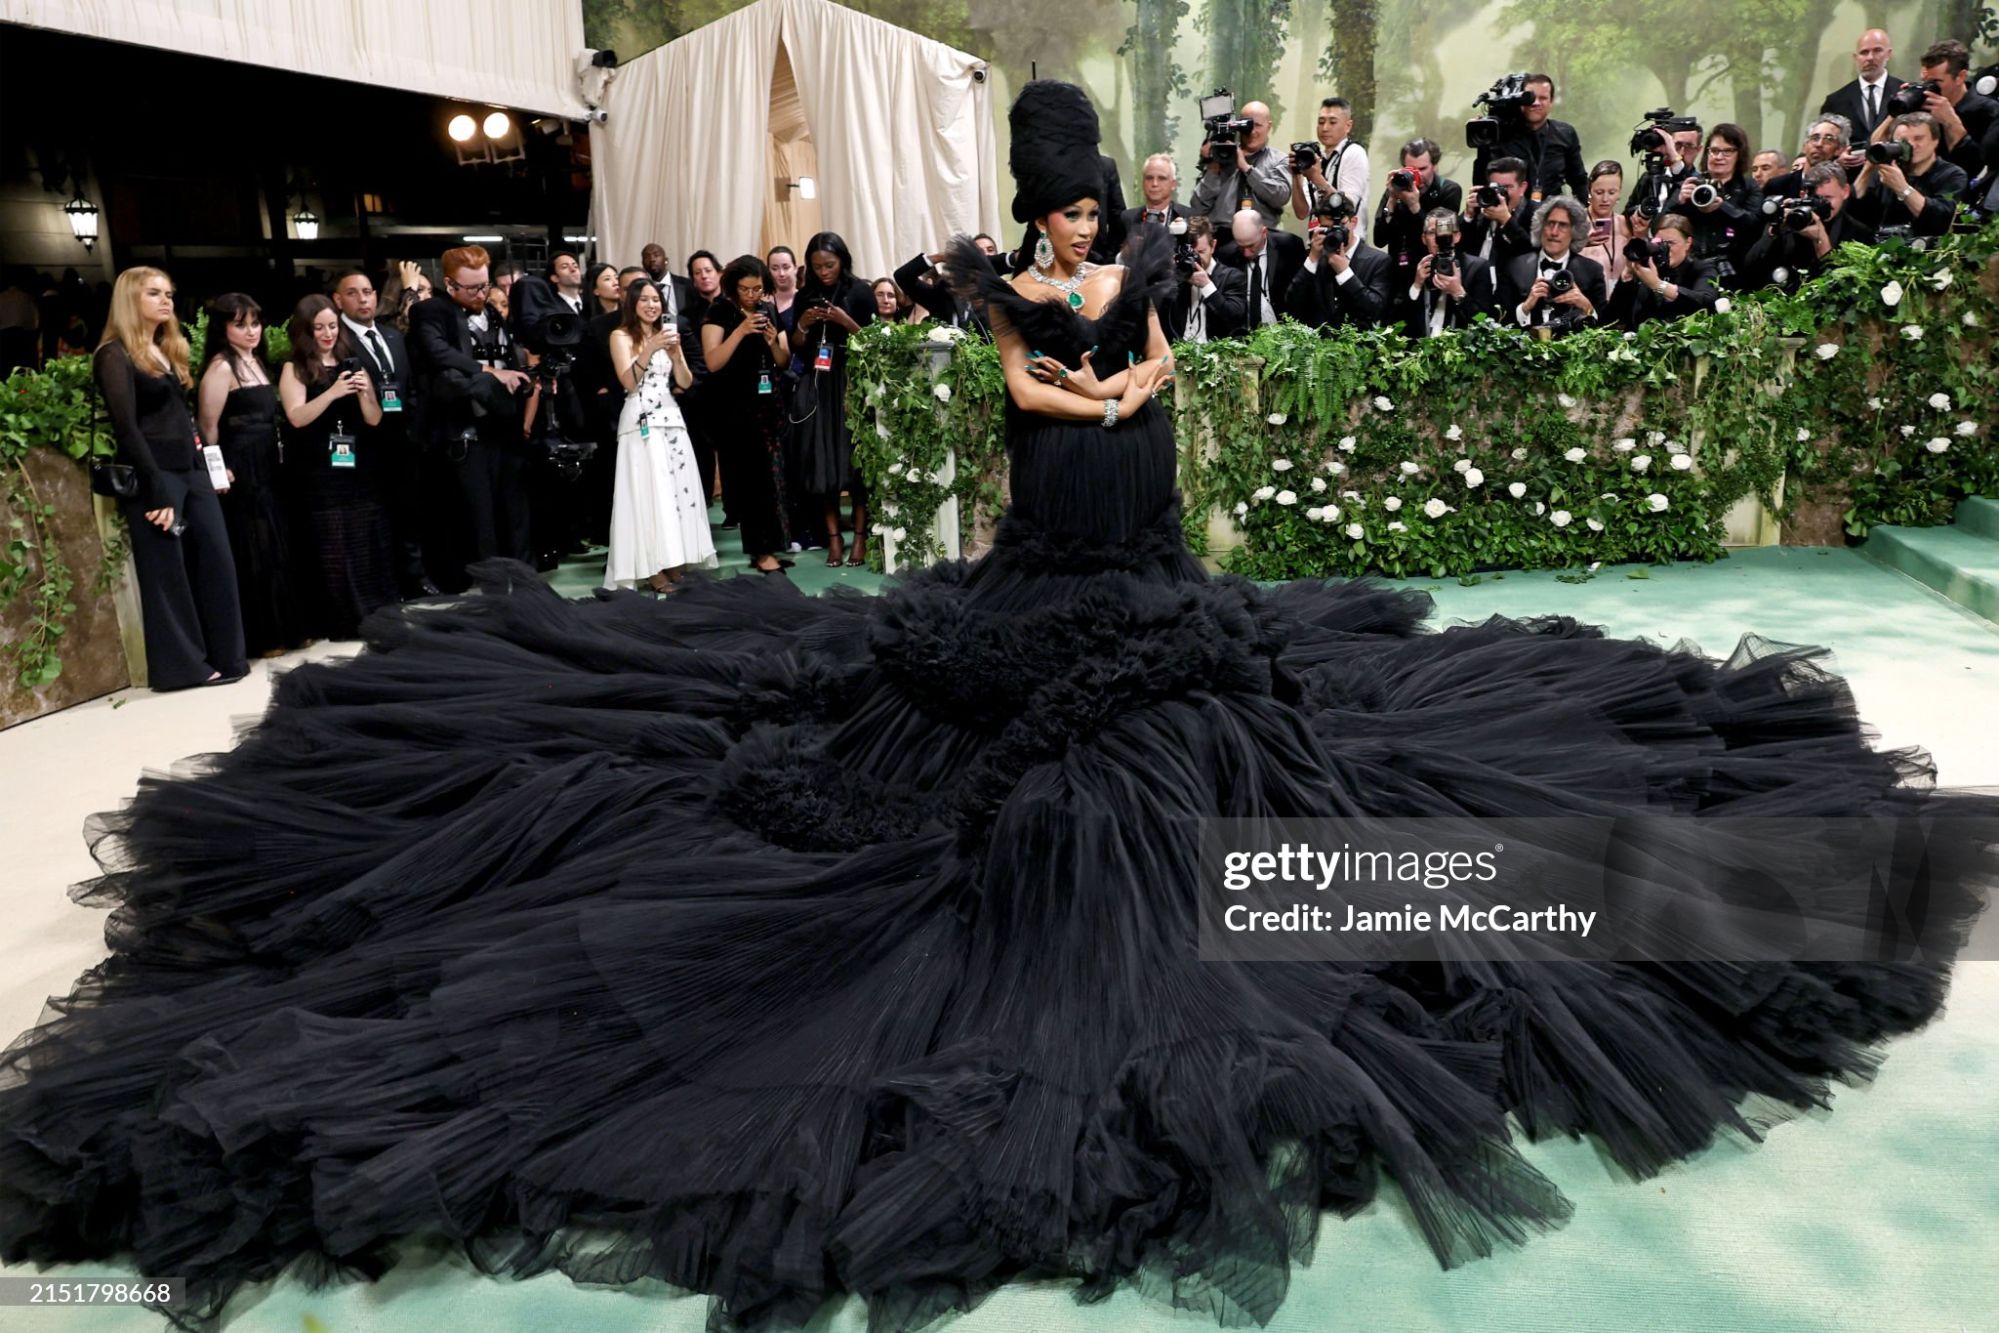 gettyimages-2151798668-2048x2048.jpg